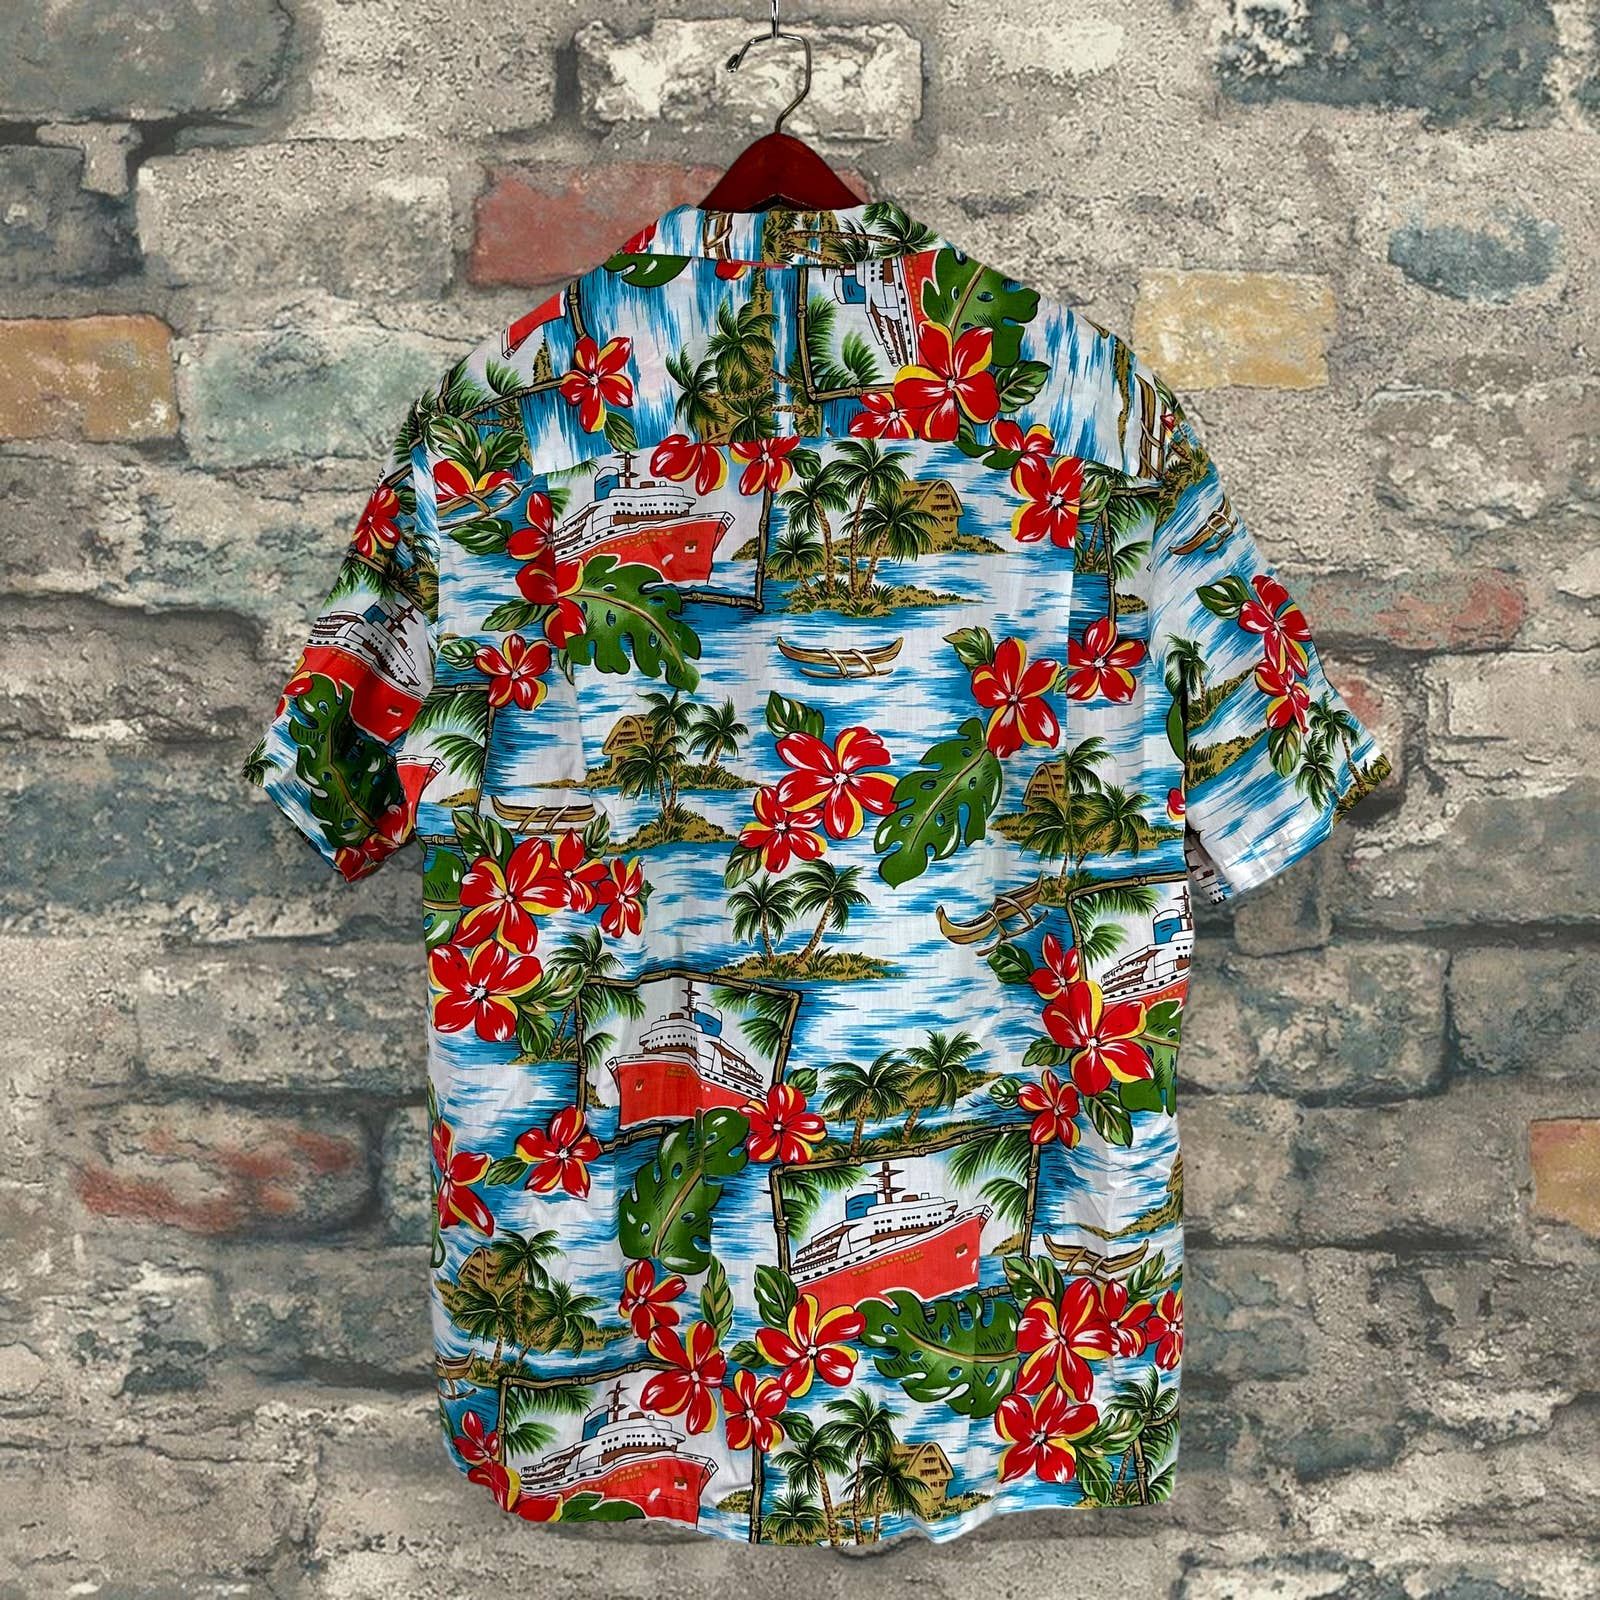 Vintage Vintage Hawaiian Shirt Made in Hawaii Button Up Collared 90s Size US XL / EU 56 / 4 - 2 Preview